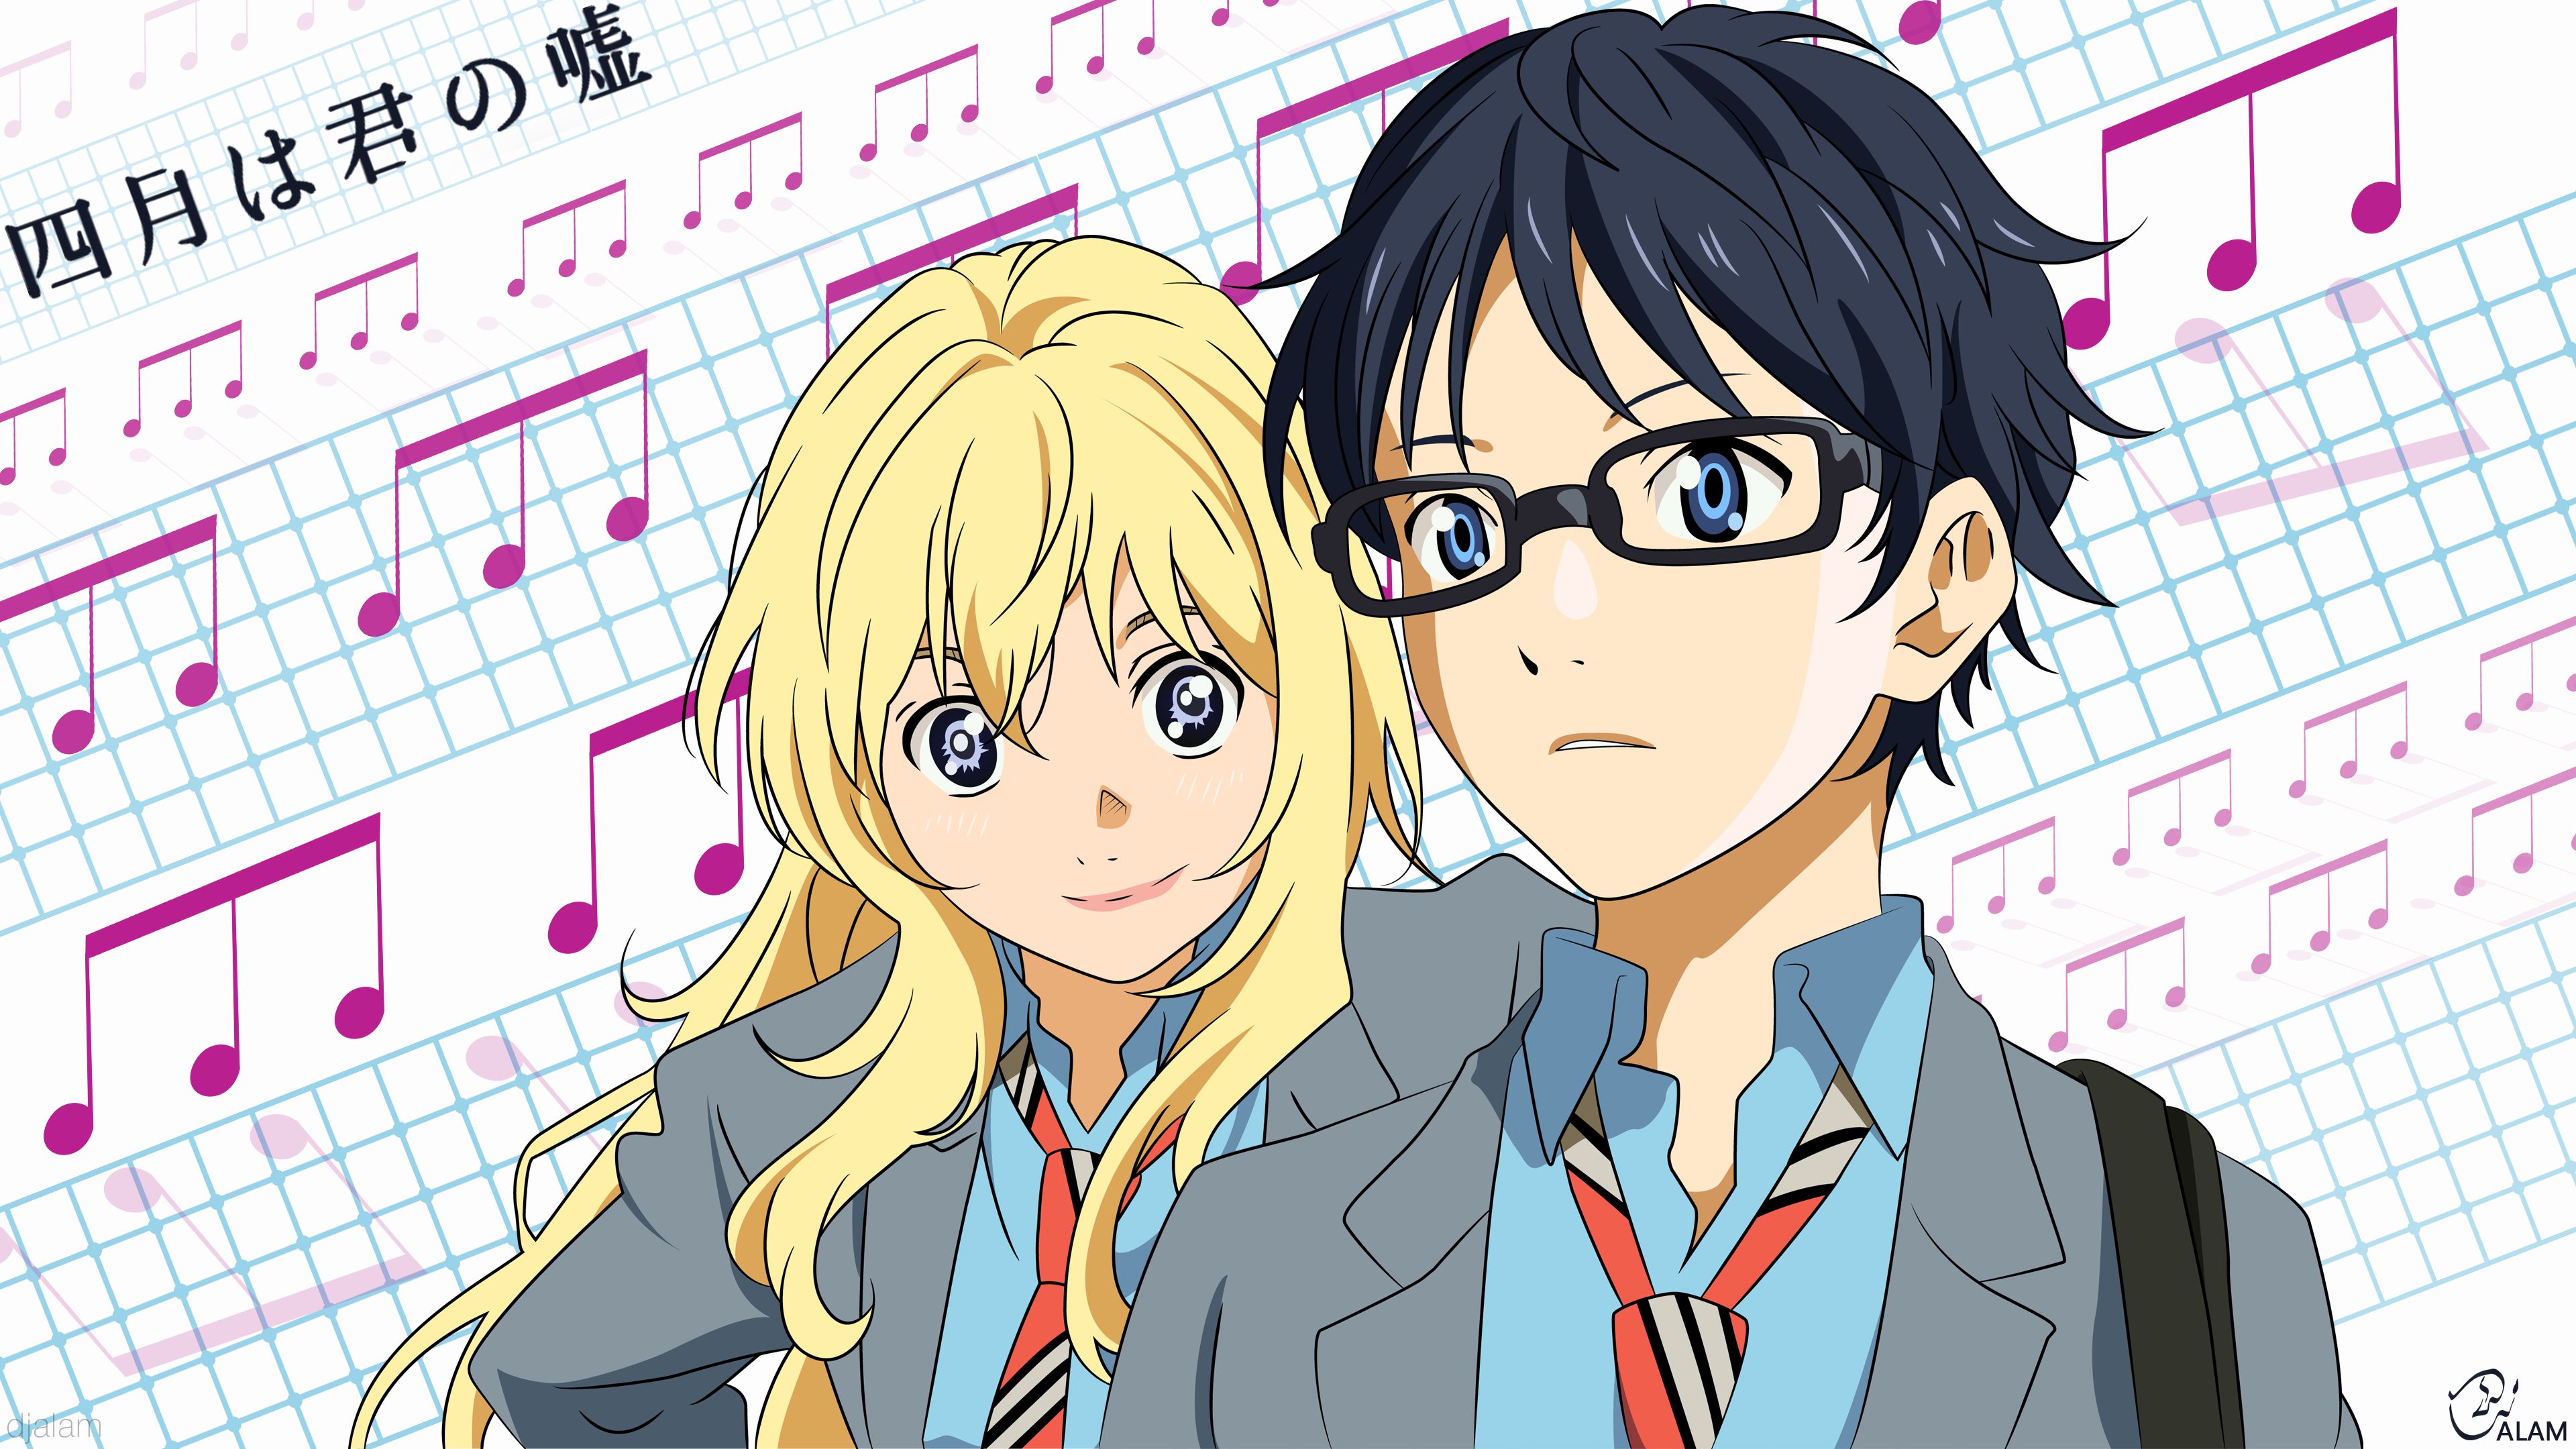 7. "Kousei Arima" from Your Lie in April - wide 3